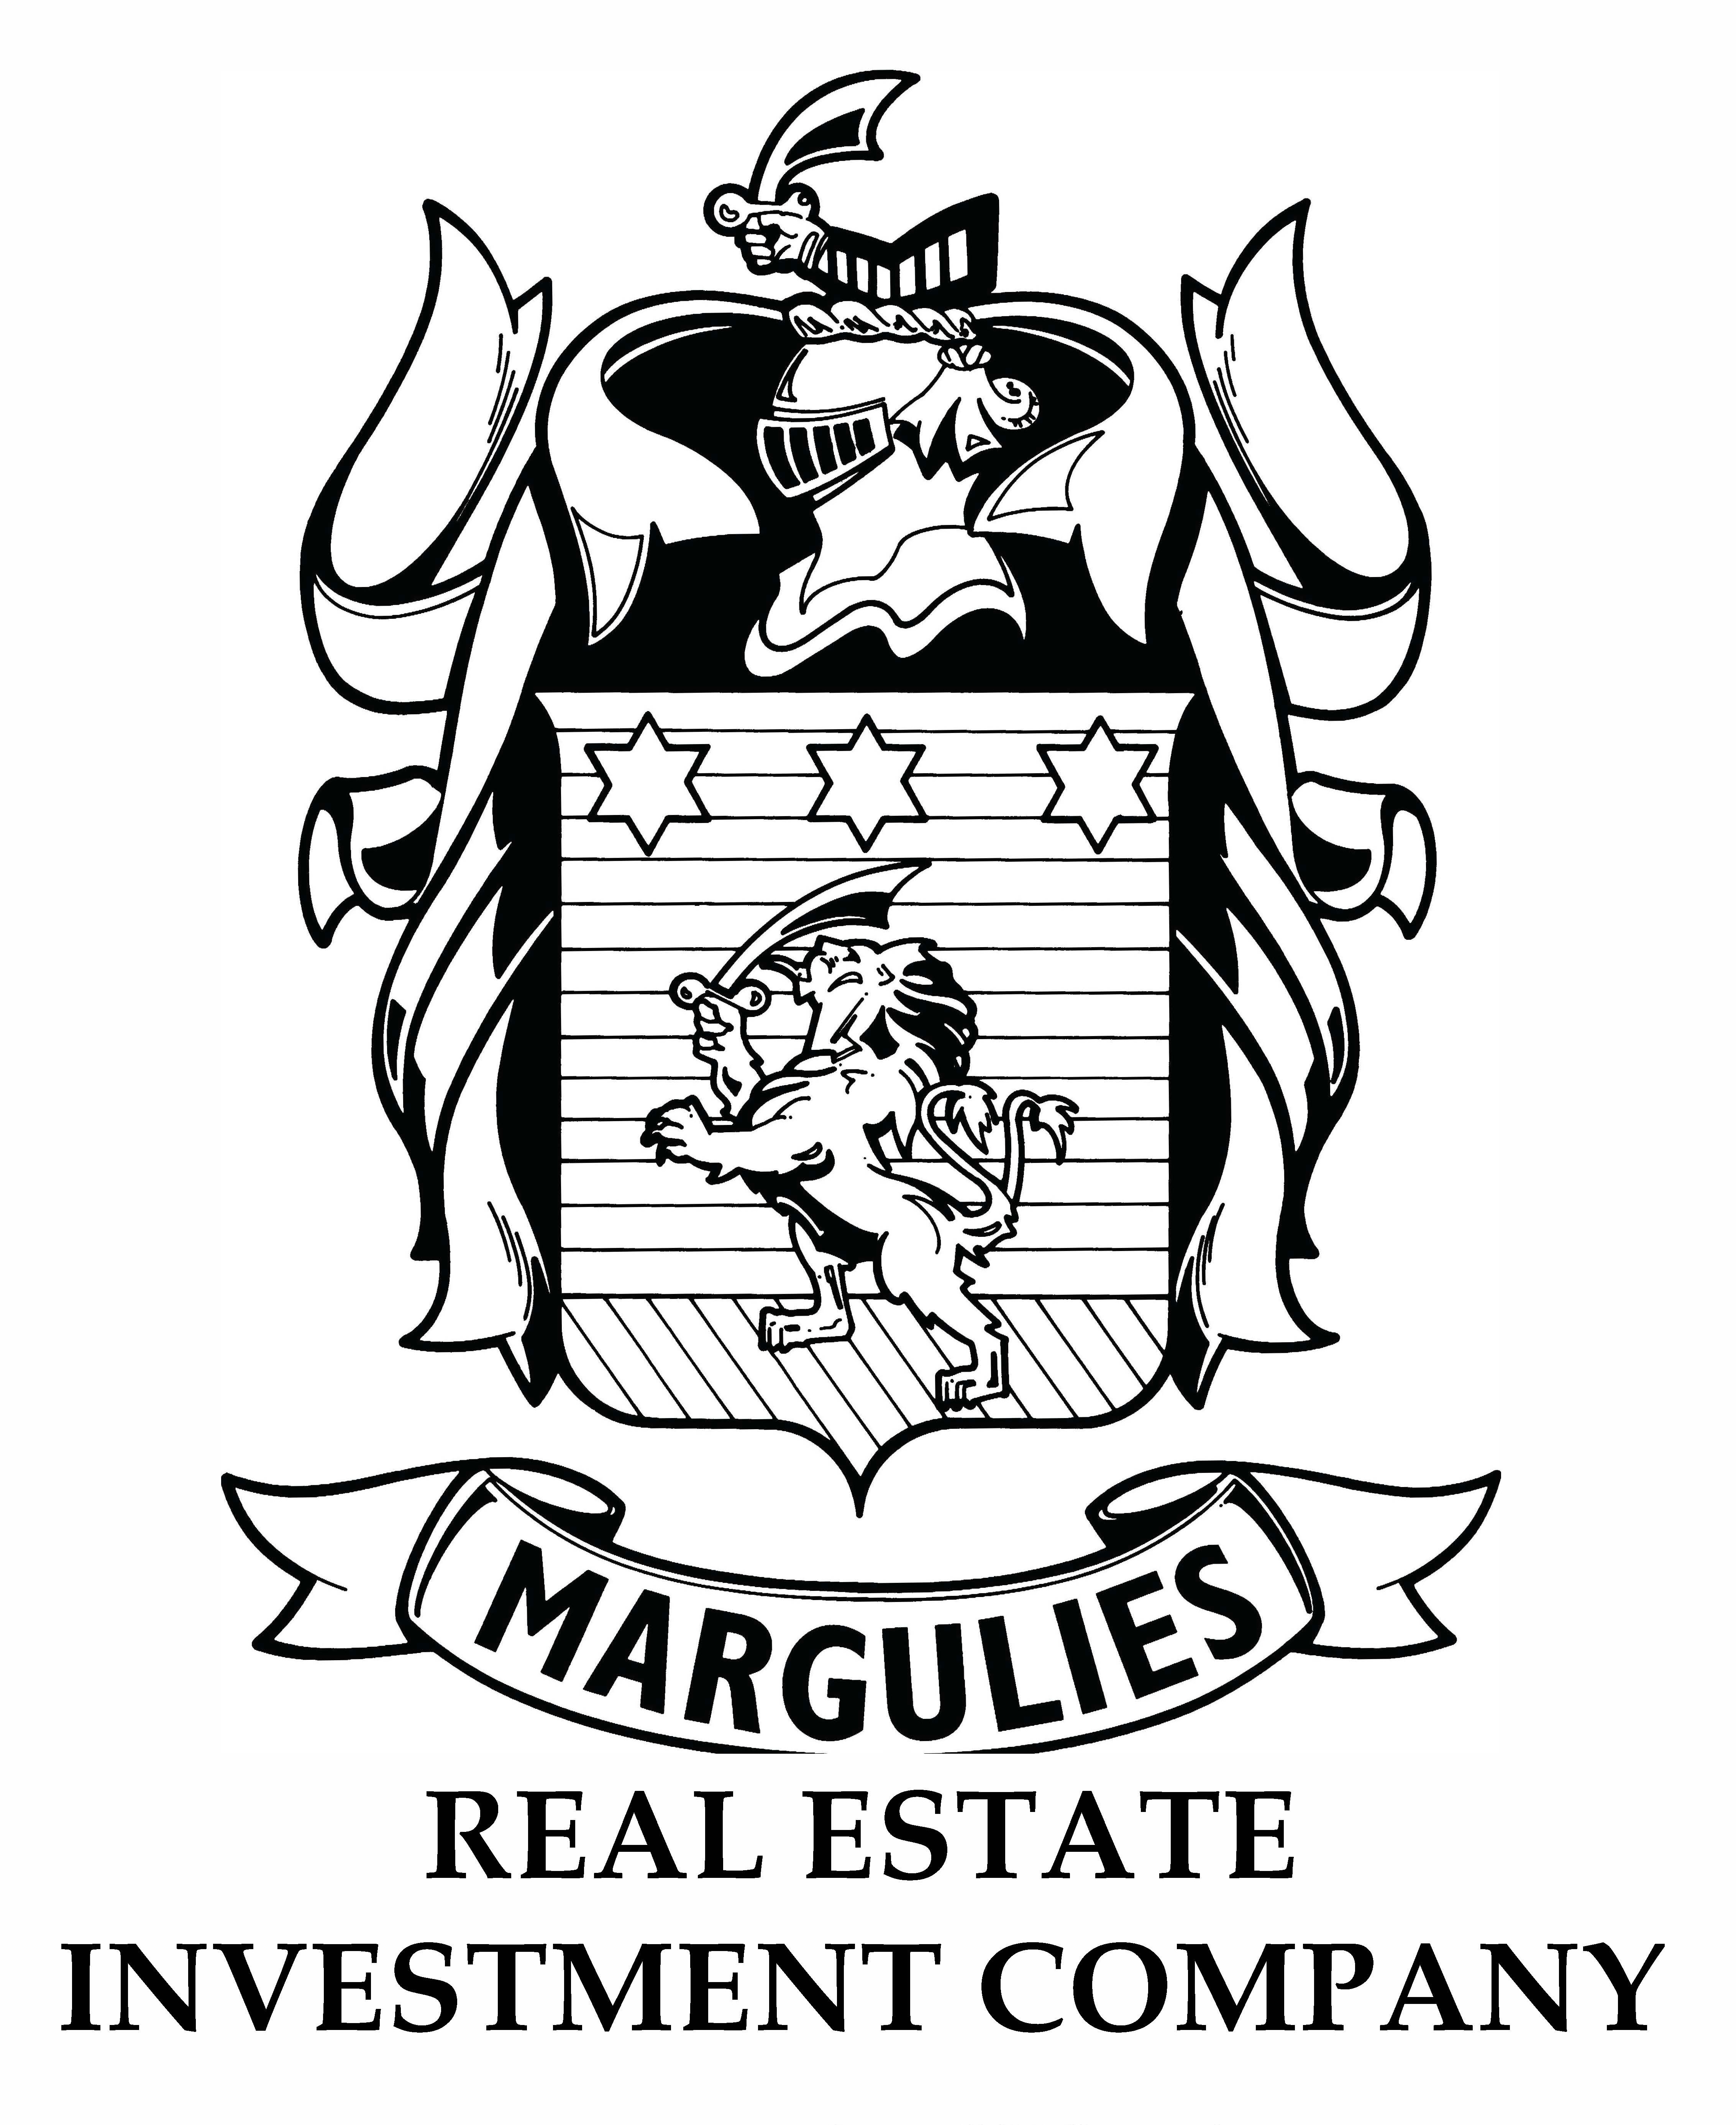 Margulies Investment Company logo